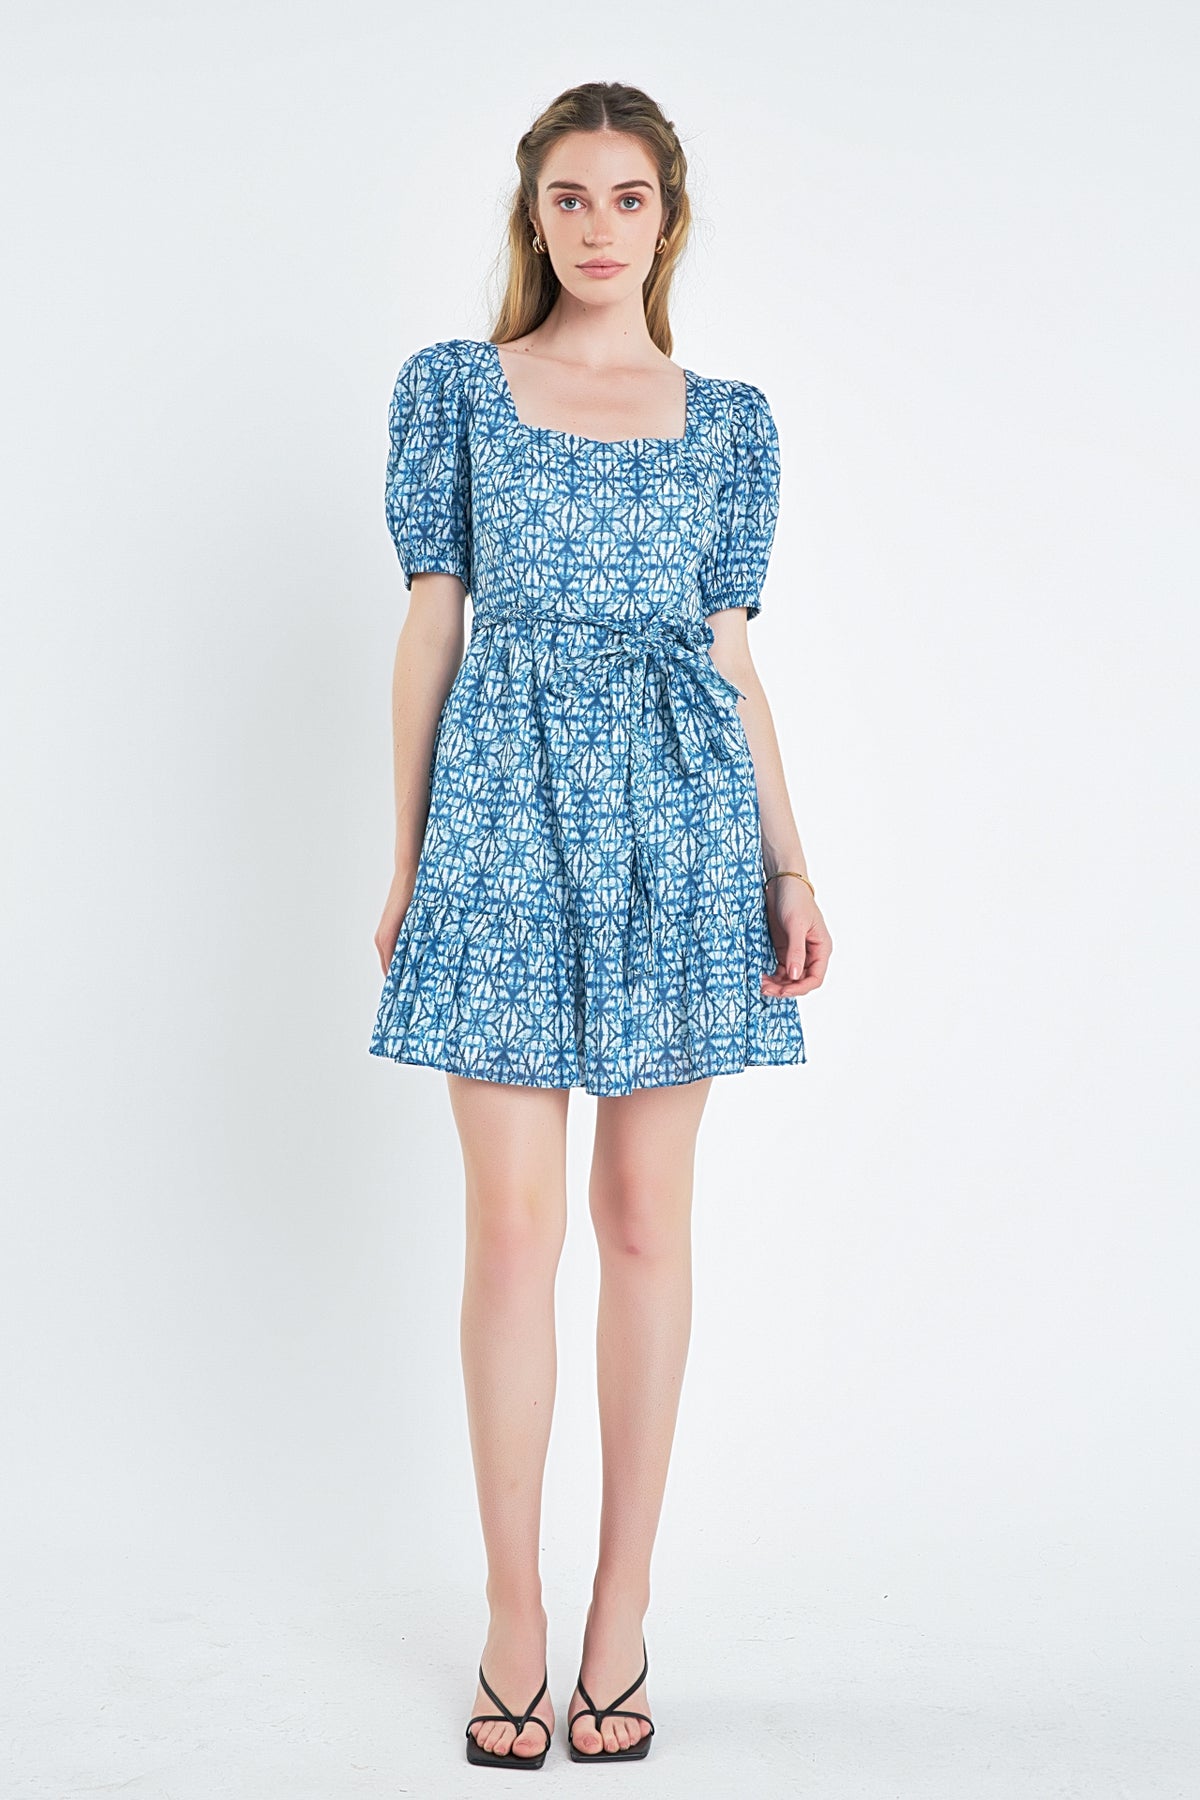 ENGLISH FACTORY - Tie Dye Print Braided Belt Mini Dress - DRESSES available at Objectrare